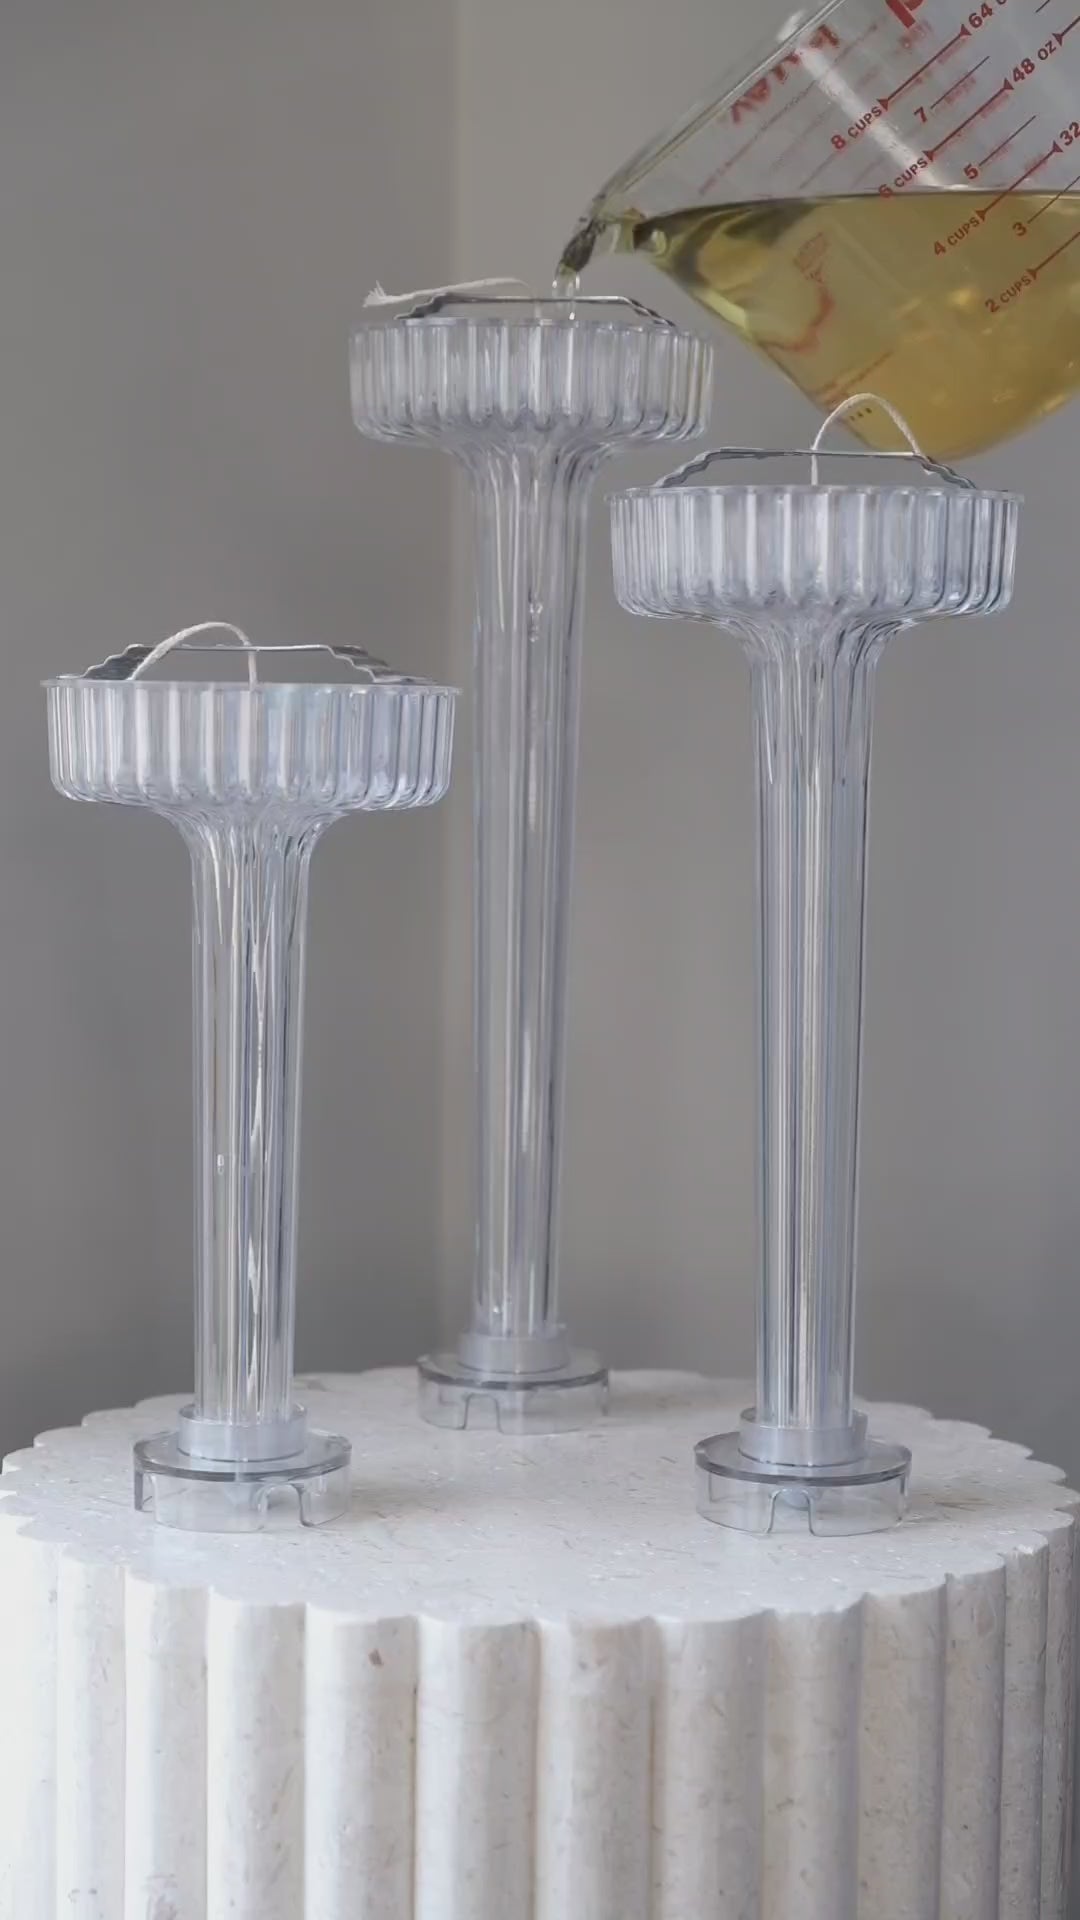 Acrylic PVC Ribbed pillar candle moulds 